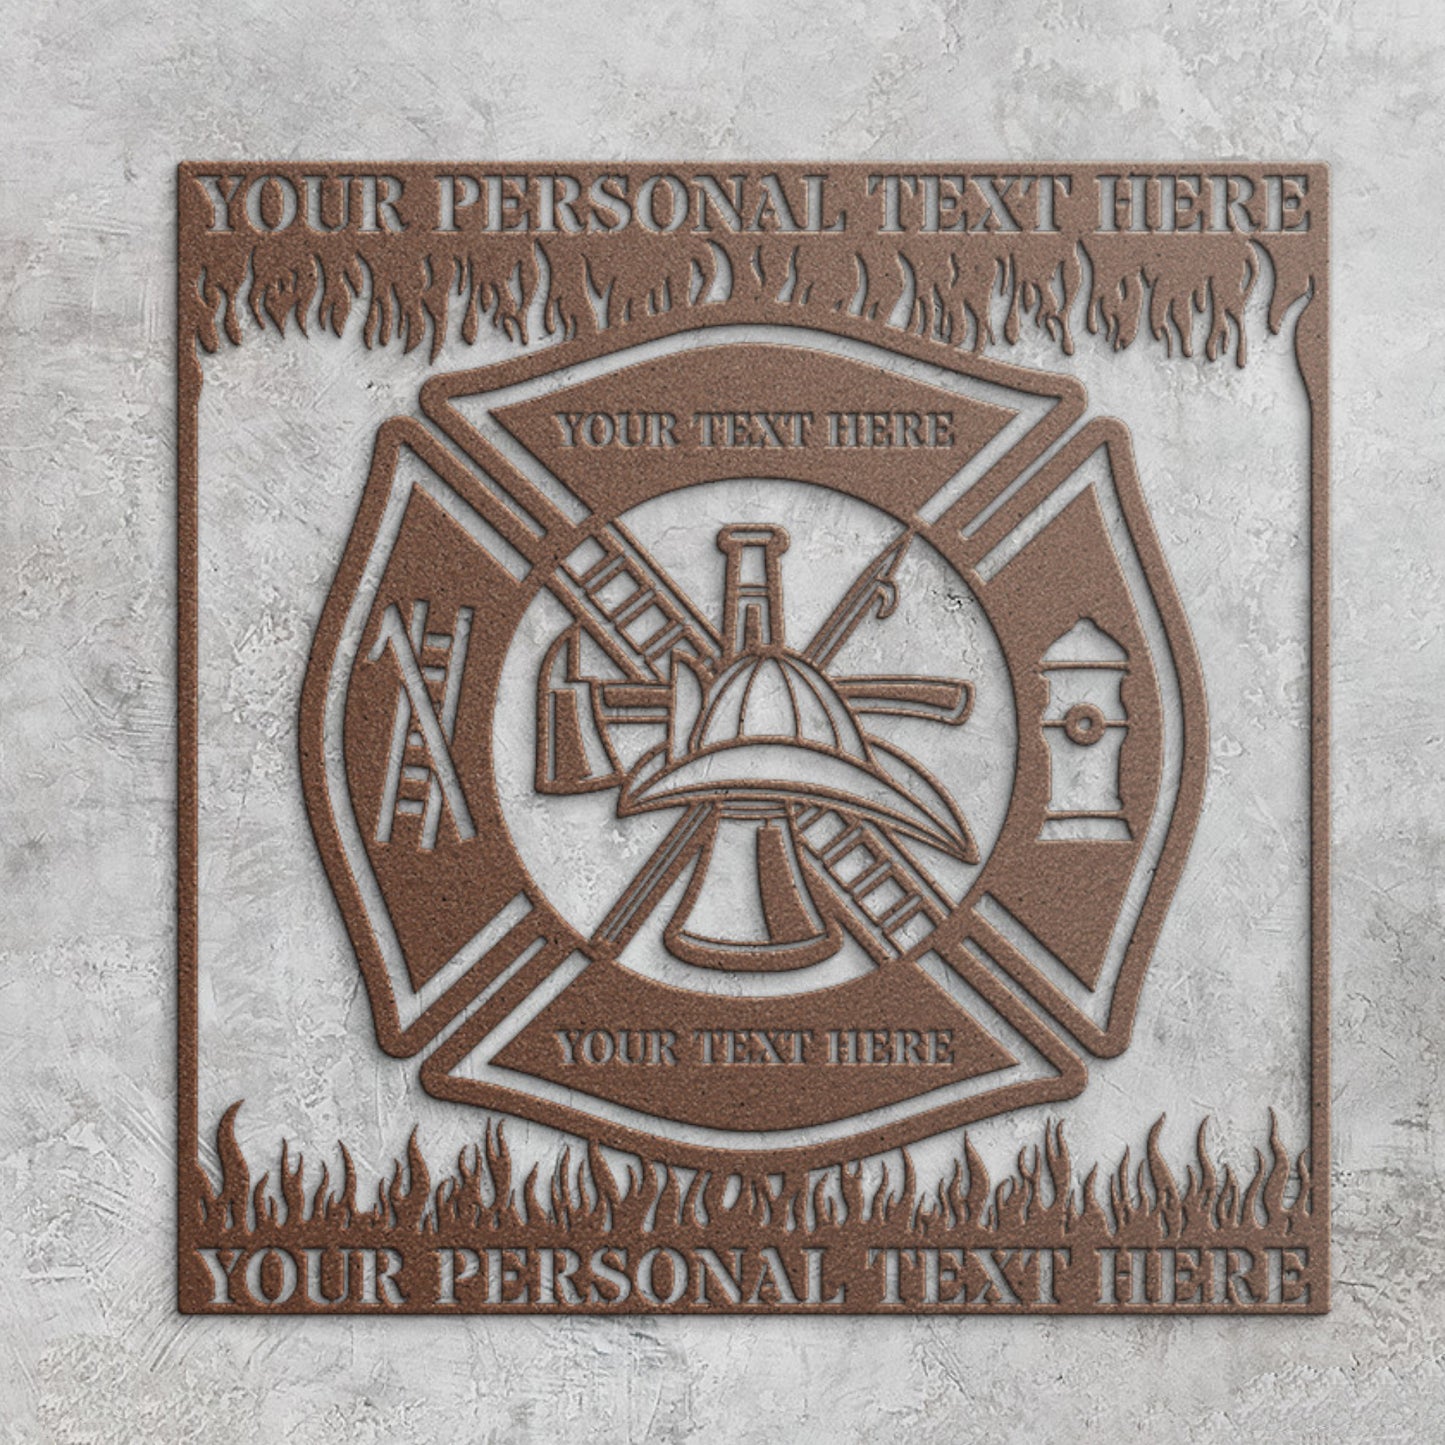 Personalized Firefighter Metal Sign Gift. Custom Maltese Cross Flames Wall Decor. First Responder, Firefighter Display Gift. Fire And Rescue